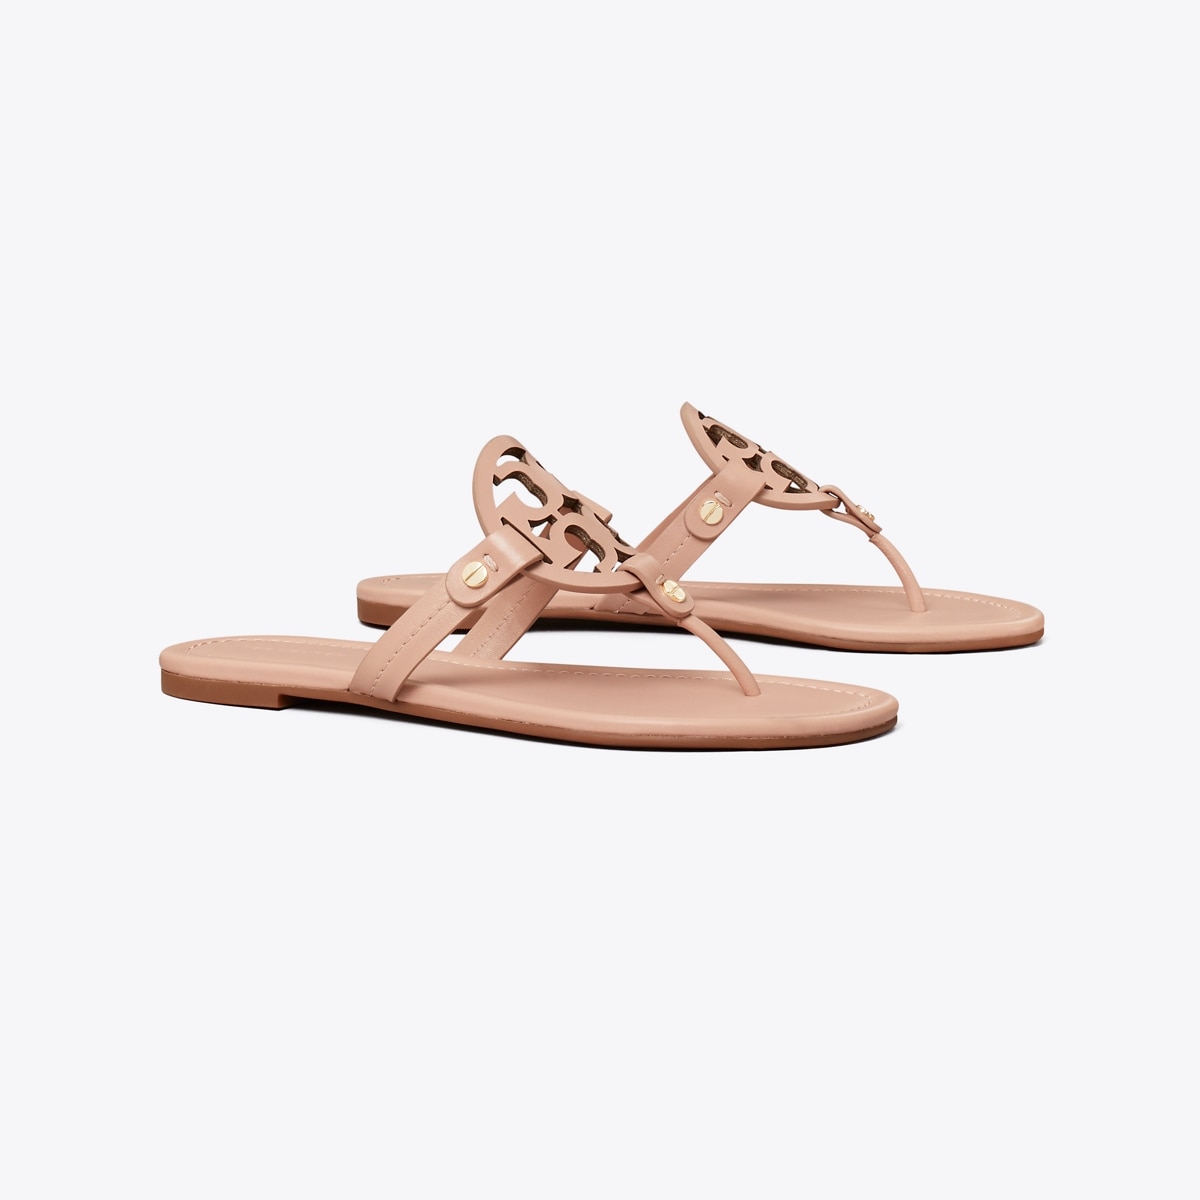 ivory tory burch sandals